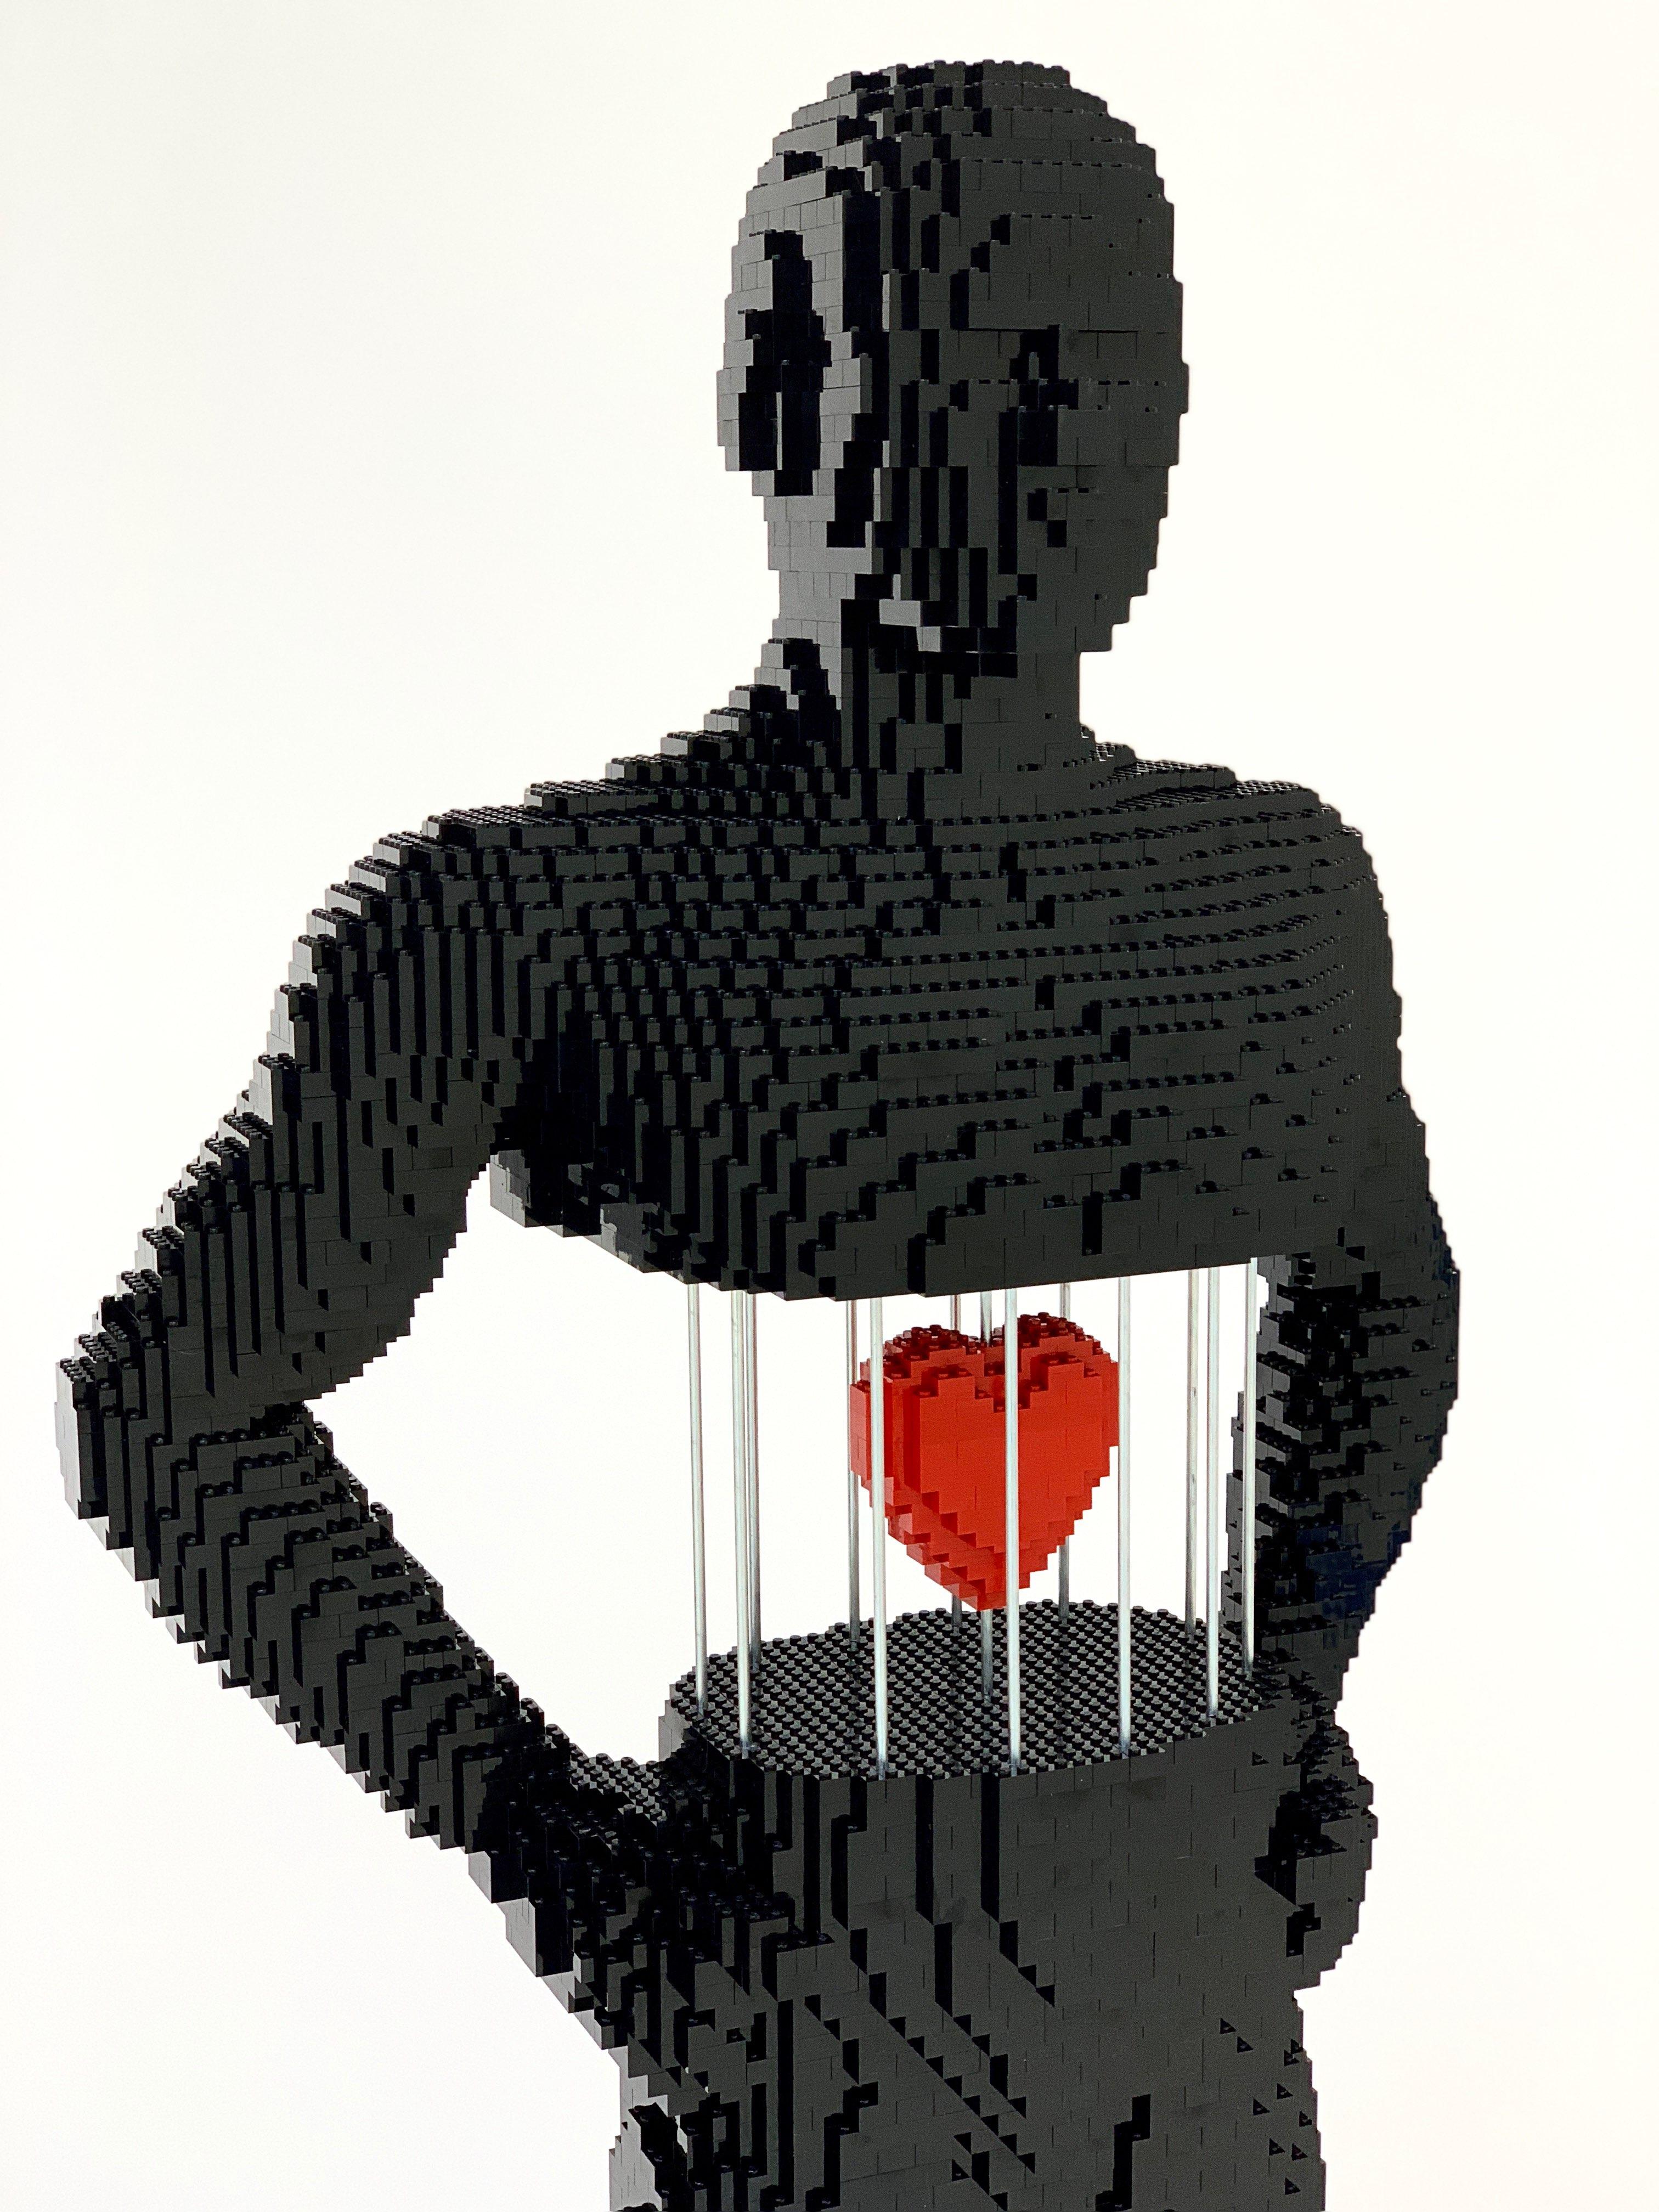 Caged Heart Full Size - Sculpture by Nathan Sawaya